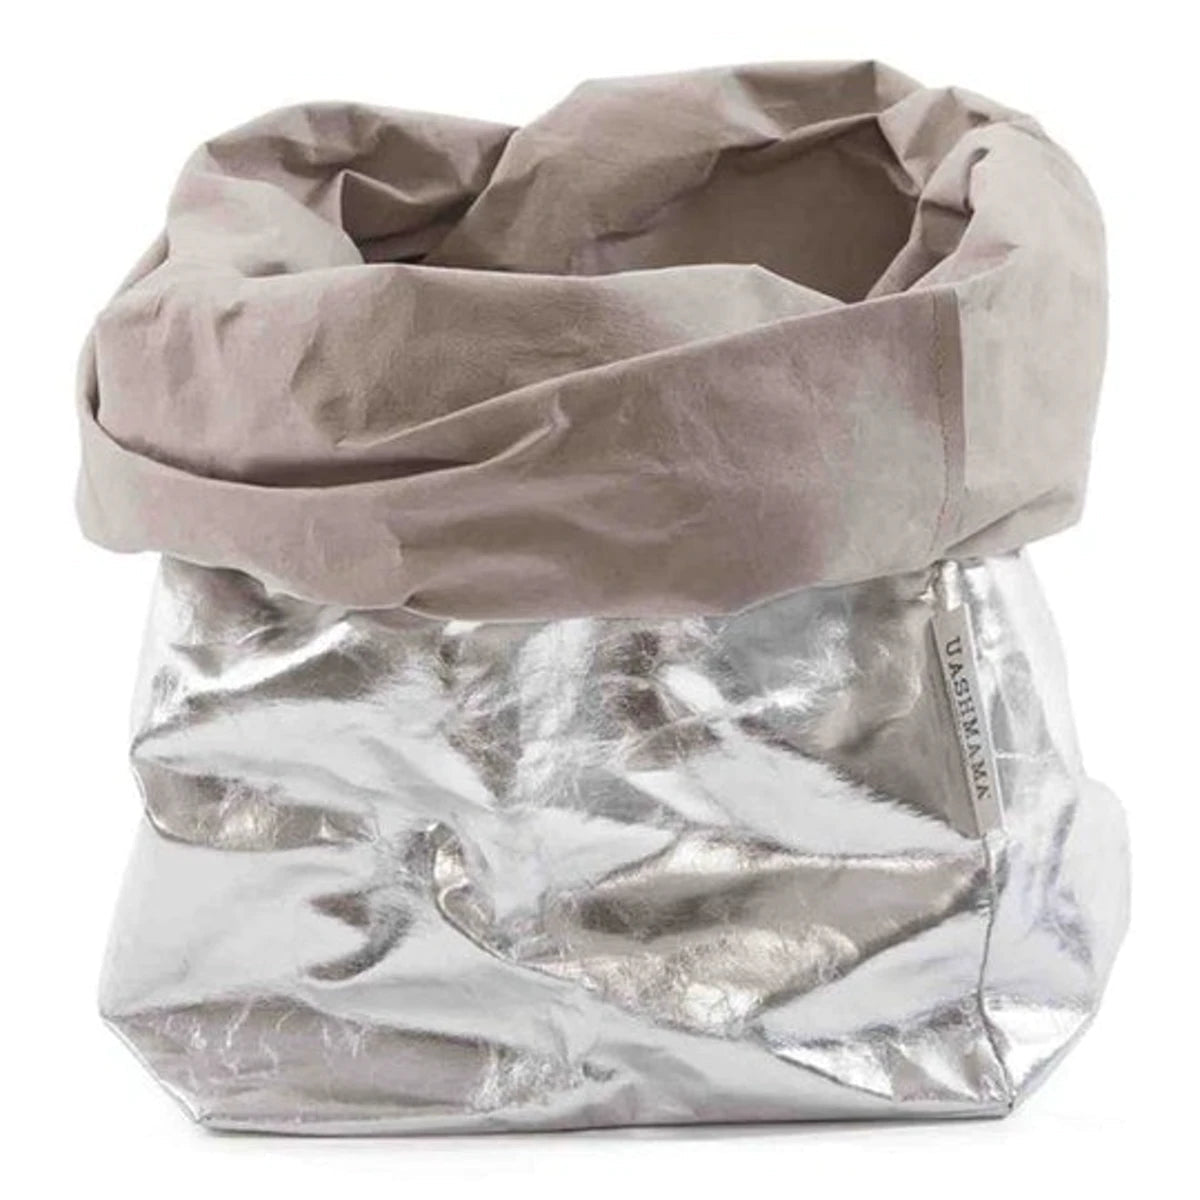 A washable paper bag is shown. The bag is rolled down at the top and features a UASHMAMA logo label on the bottom left corner. The bag pictured is the gigantic size in metallic silver.